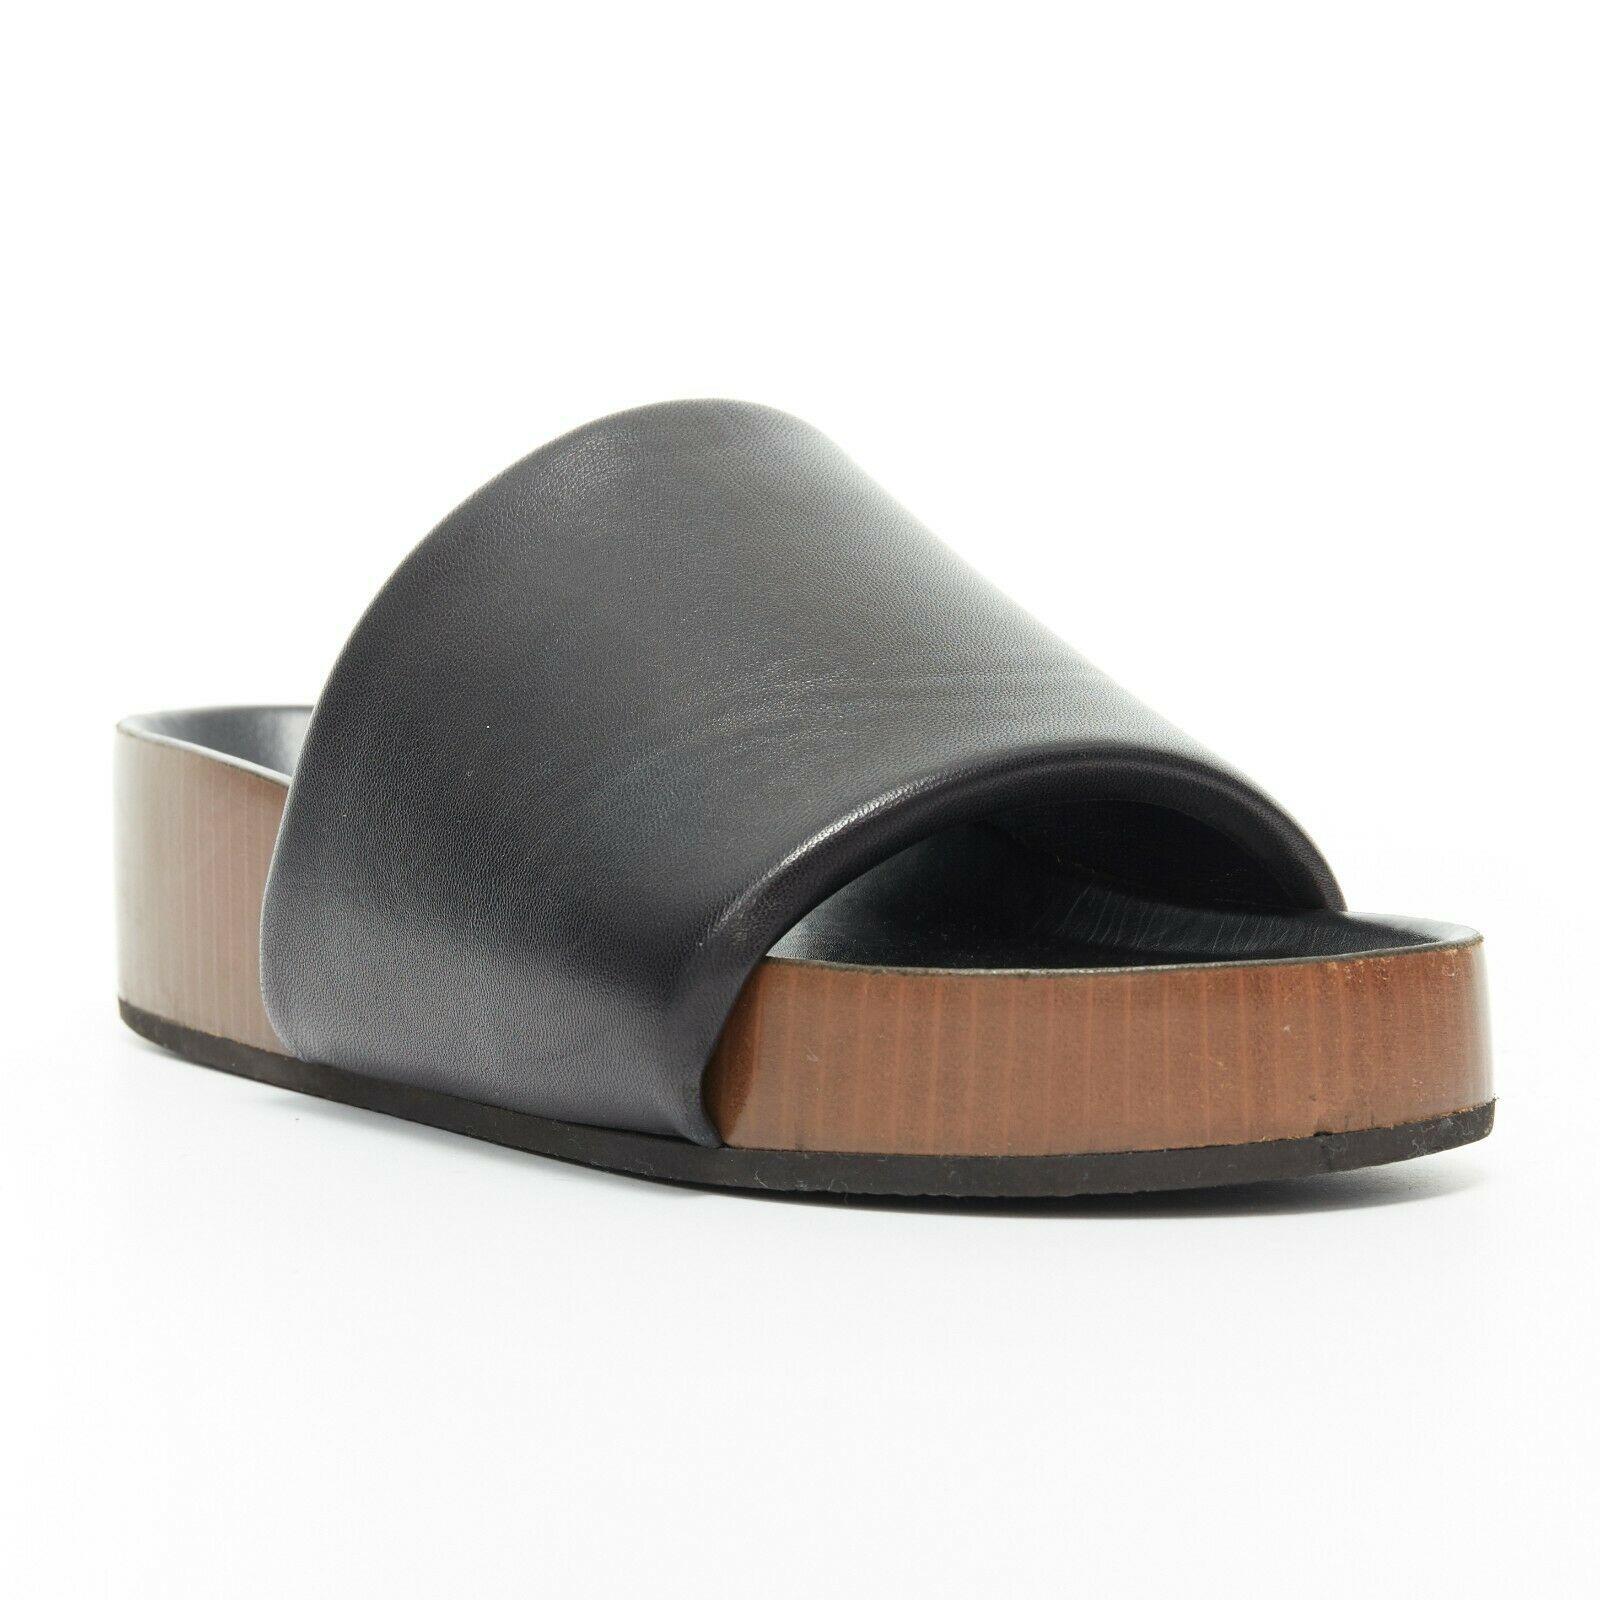 CELINE PHOEBE PHILO Boxy black padded leather thick band thick sole slides EU37

CELINE BY PHOEBE PHILO
Boxy sandals. Black lightly padded leather upper. Thick single strap. Open toe. Moulded black leather covered footbed. Brown faux wood print